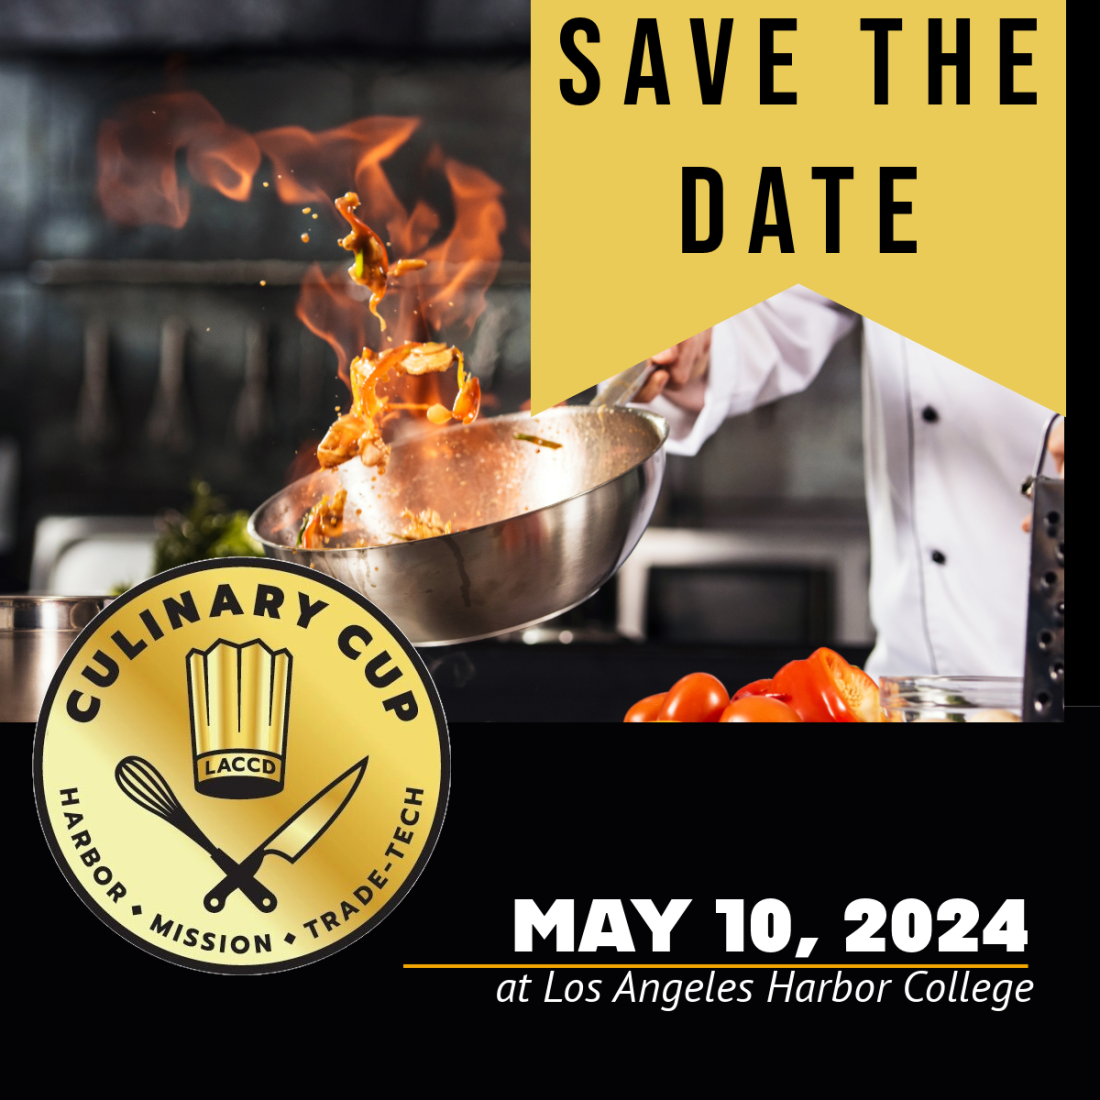 Culinary Cup Save the Date May 10, 2024